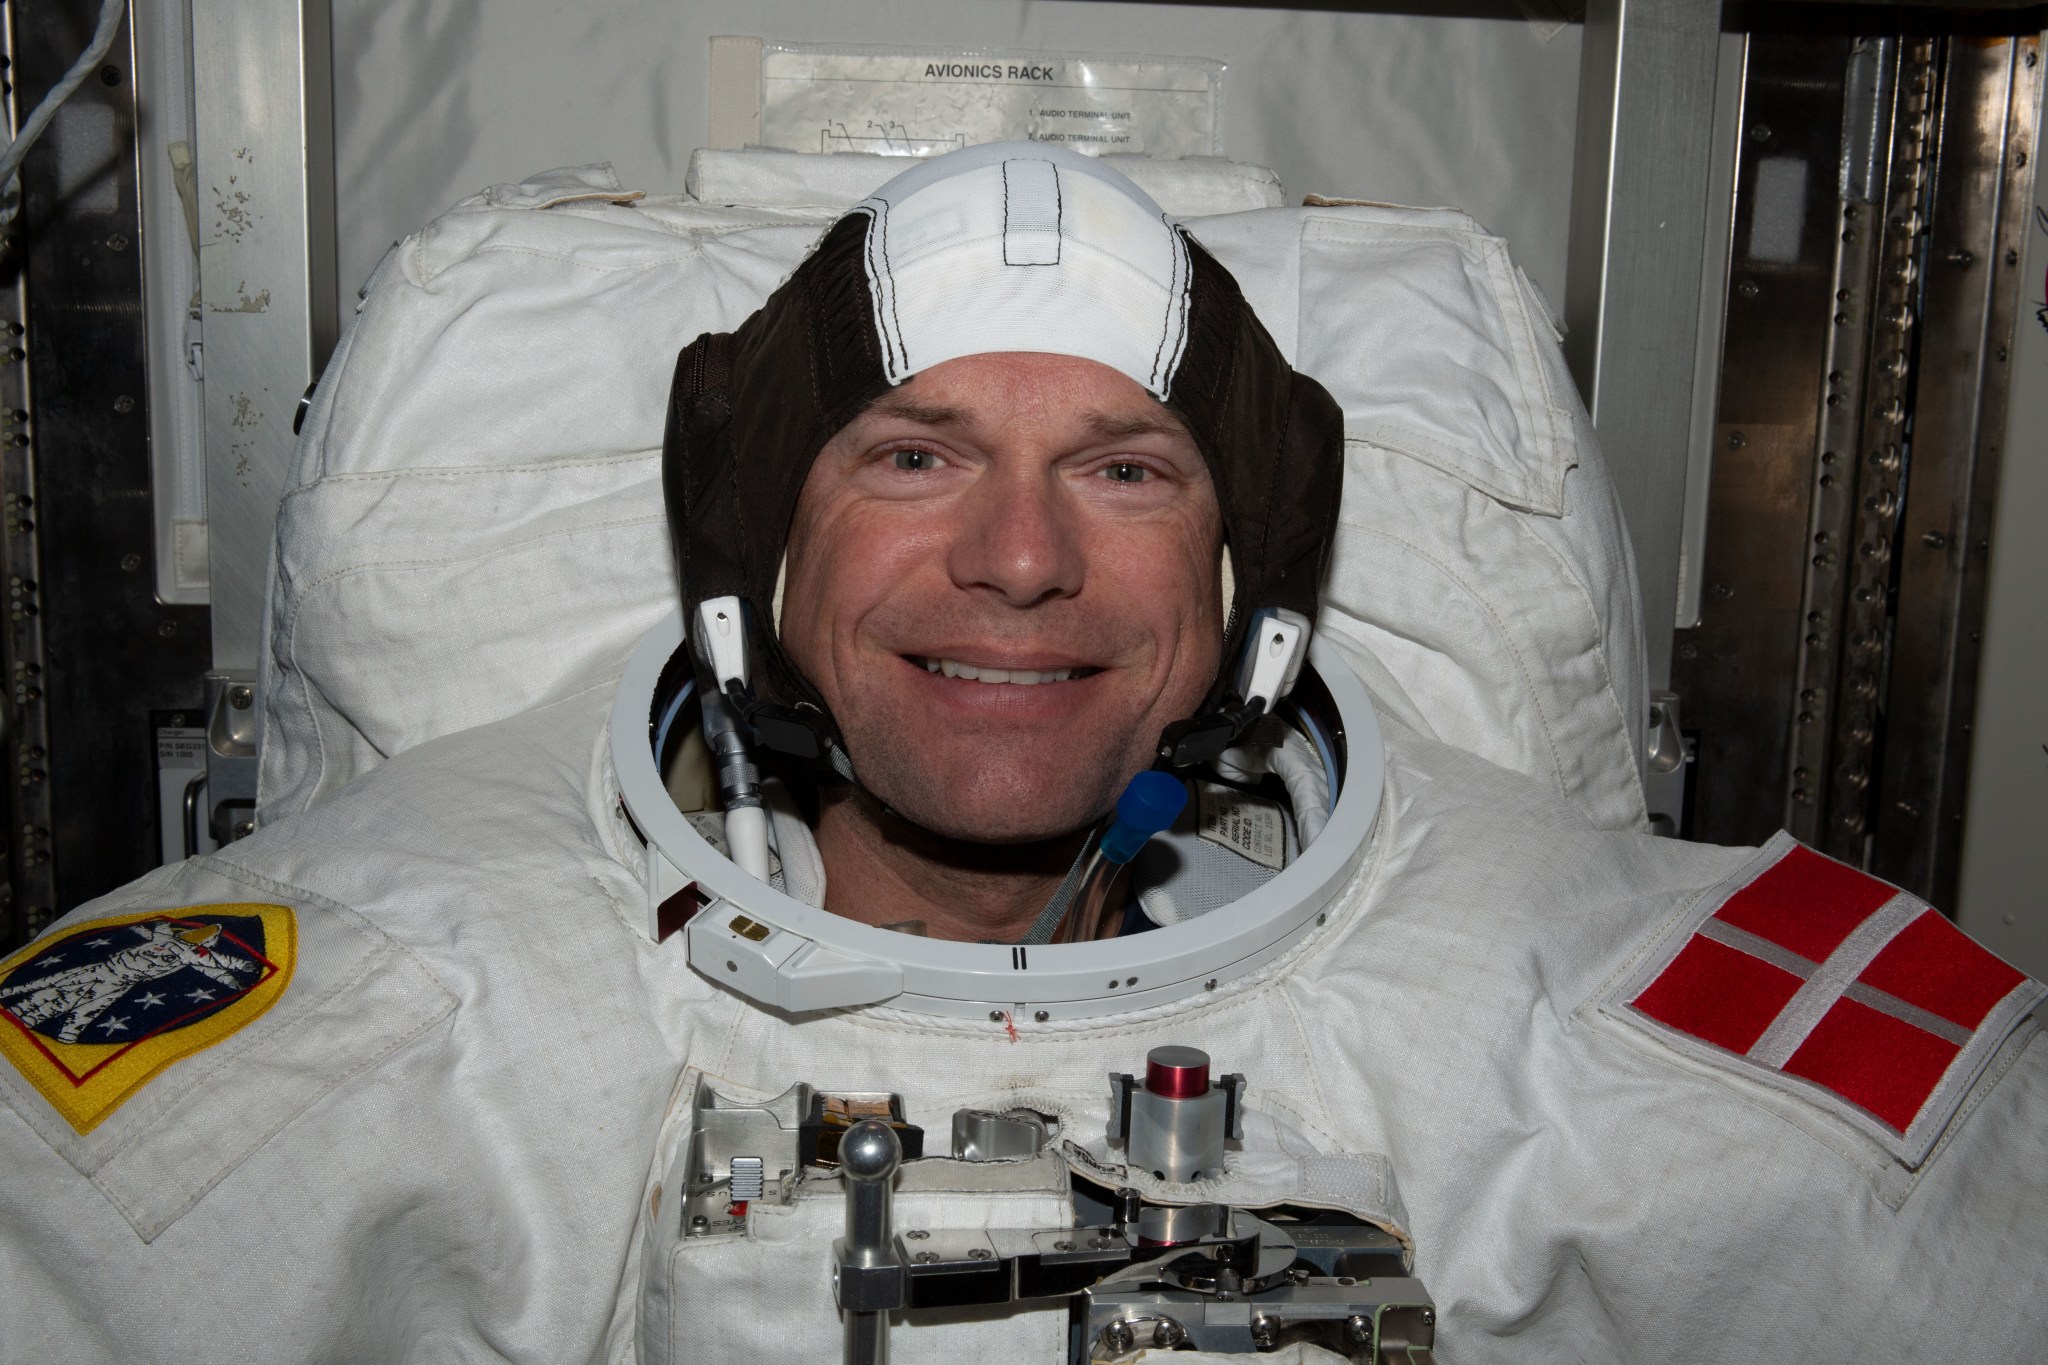 ESA (European Space Agency) astronaut and Expedition 70 Commander Andreas Mogensen is pictured trying on his spacesuit and testing its components aboard the International Space Station's Quest airlock in preparation for an upcoming spacewalk.